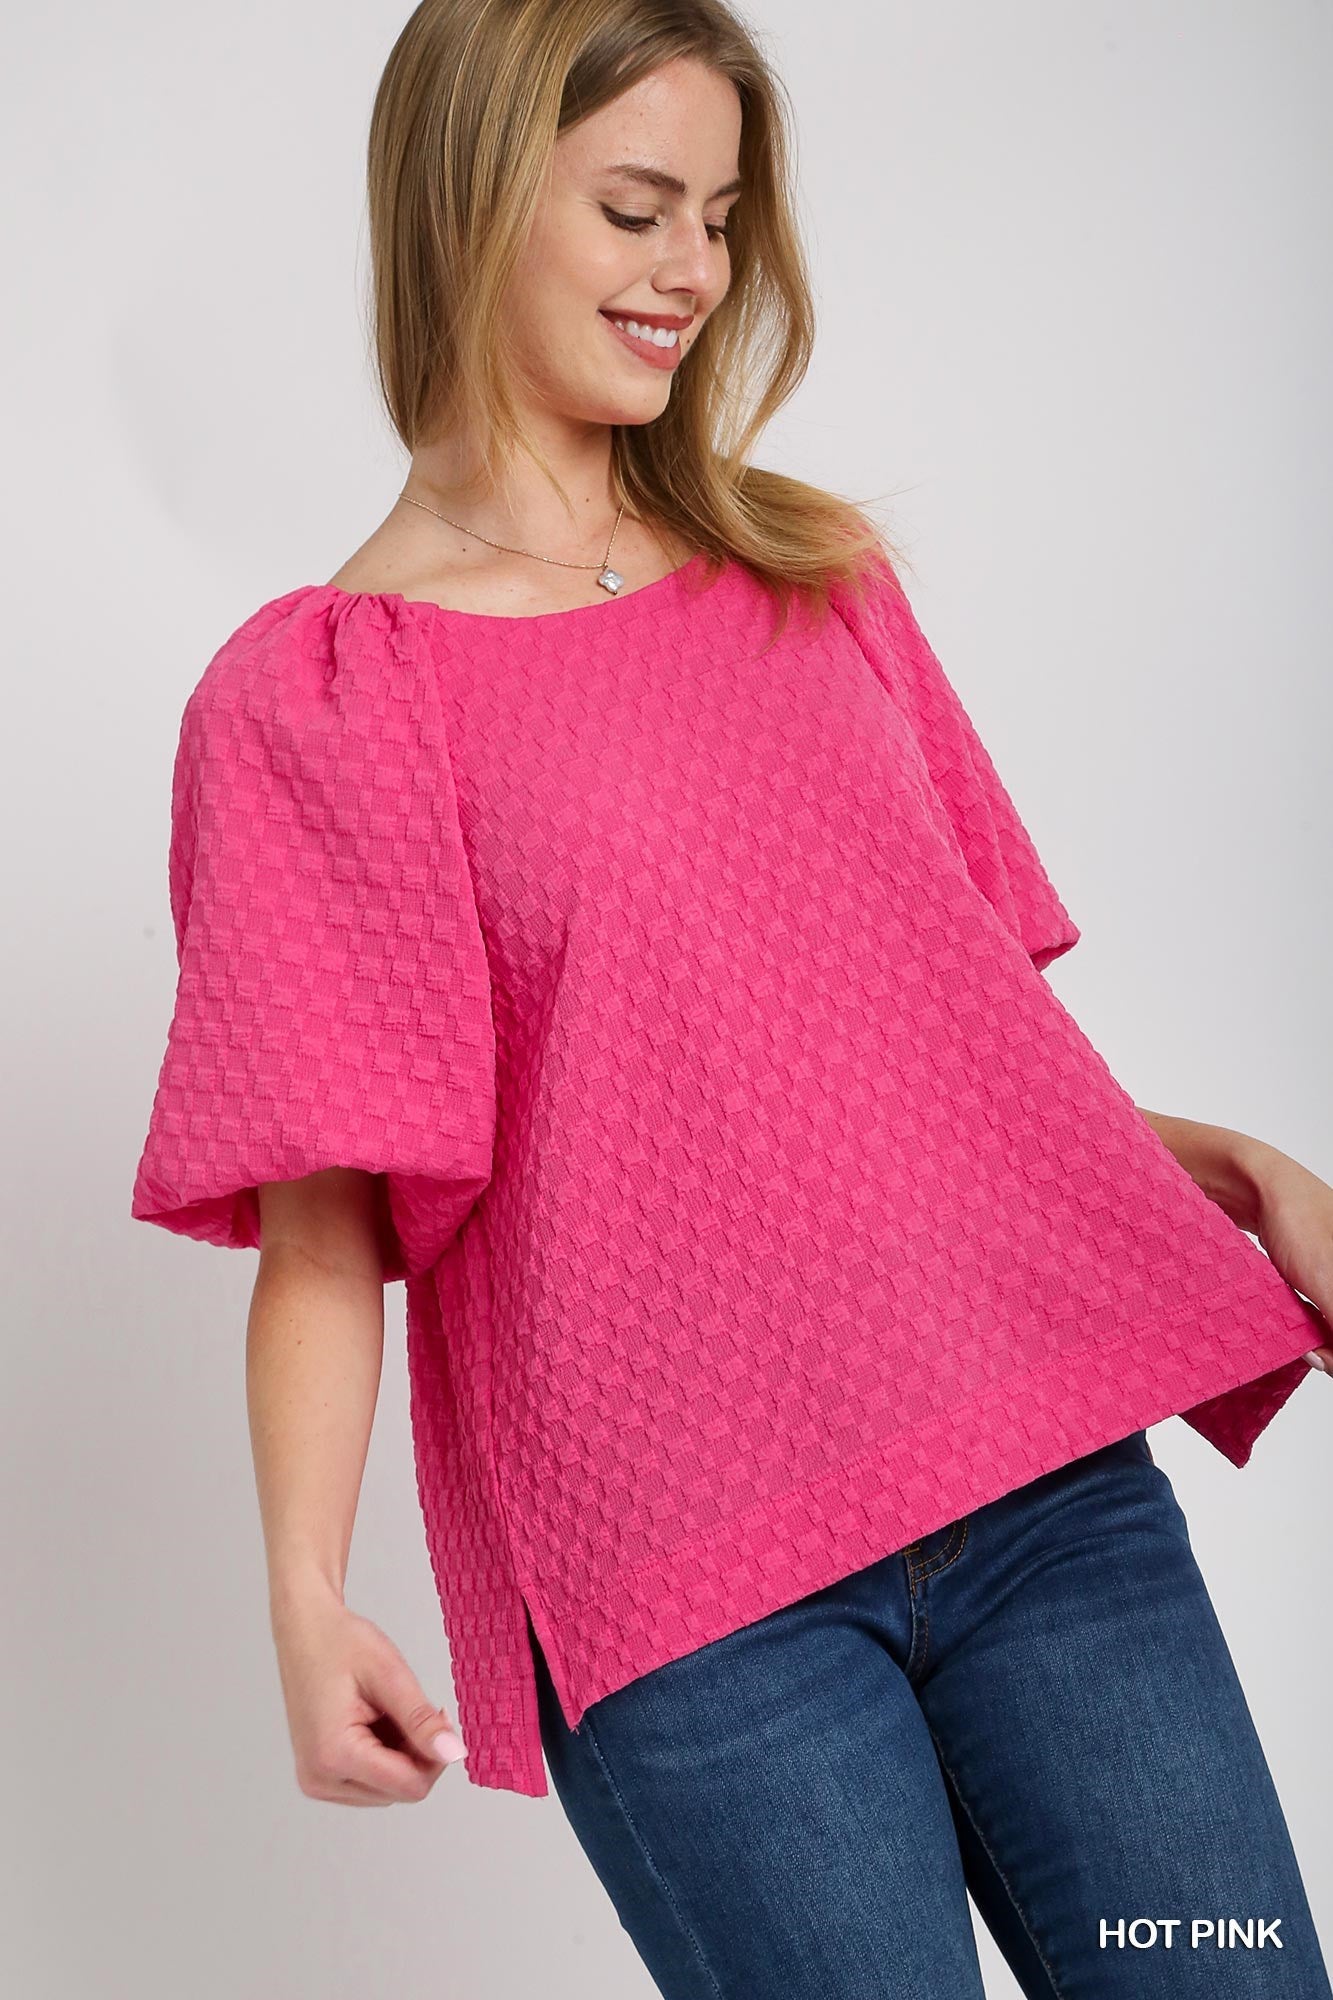 Hot Pink Round Neck Boxy Cut Puff Sleeve Top